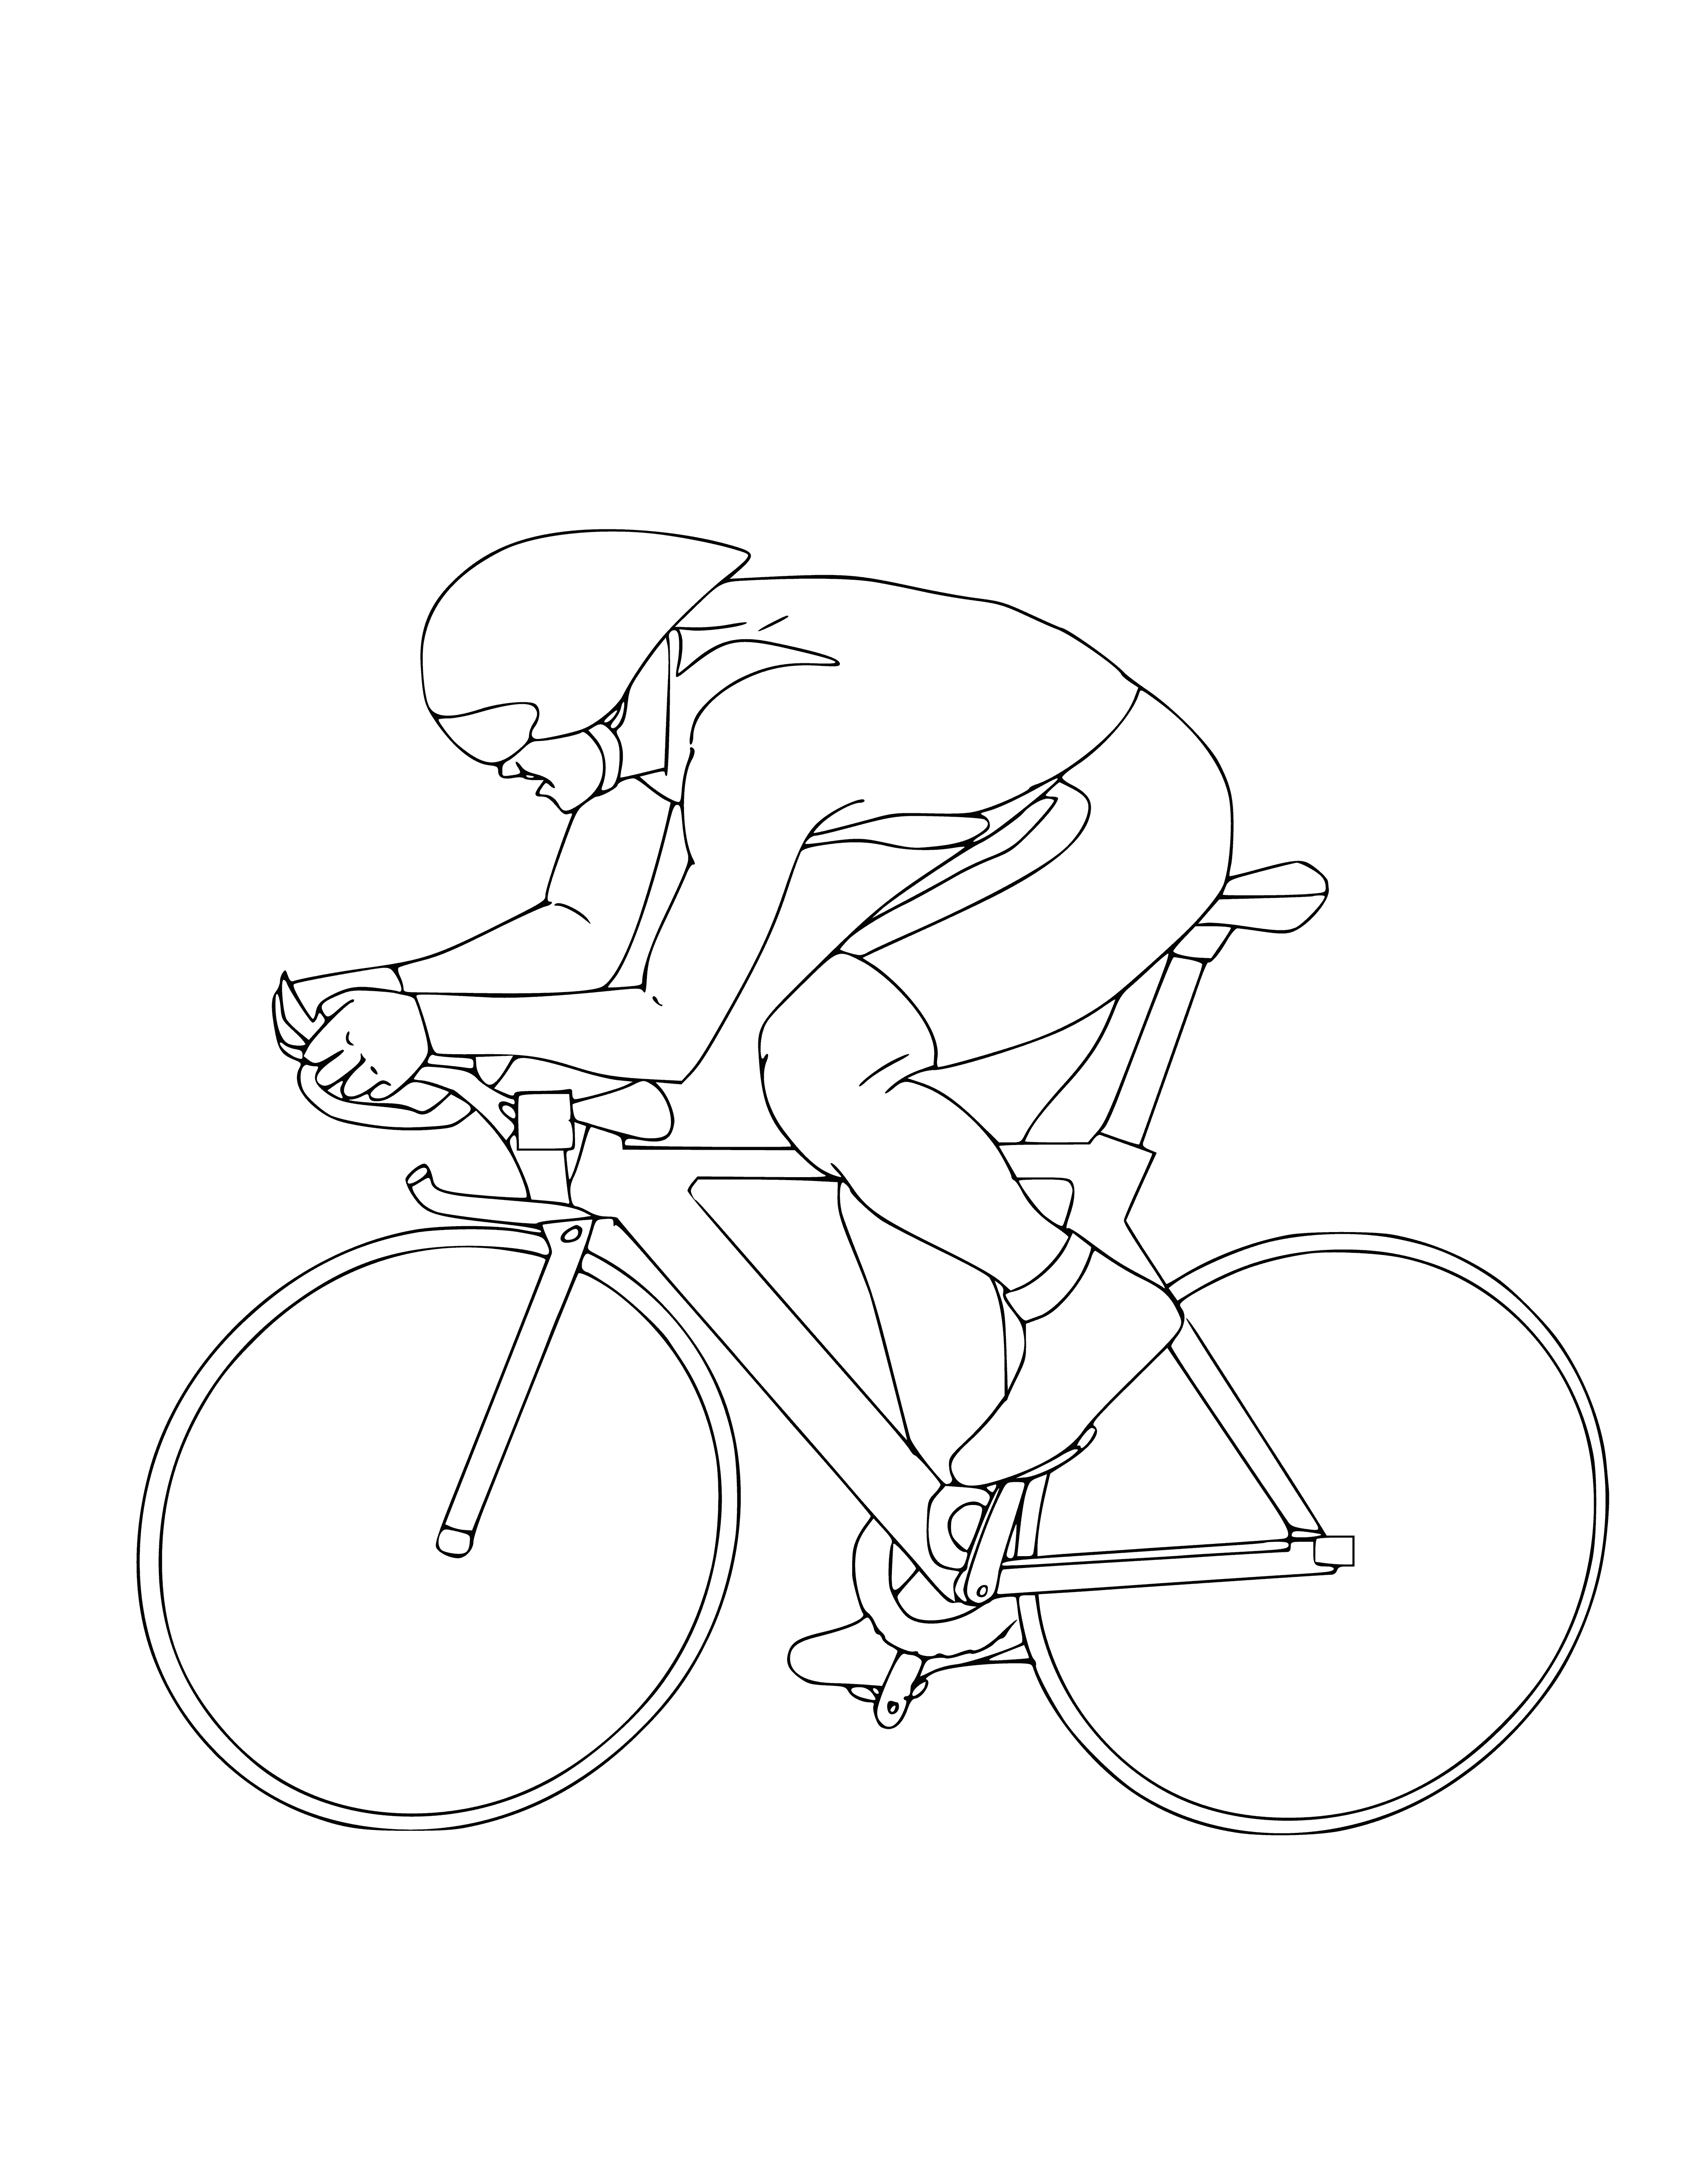 coloring page: 8 racers cycling down a road in teams of 4, wearing brightly-colored uniforms, with a scenic backdrop of mountains & forests.